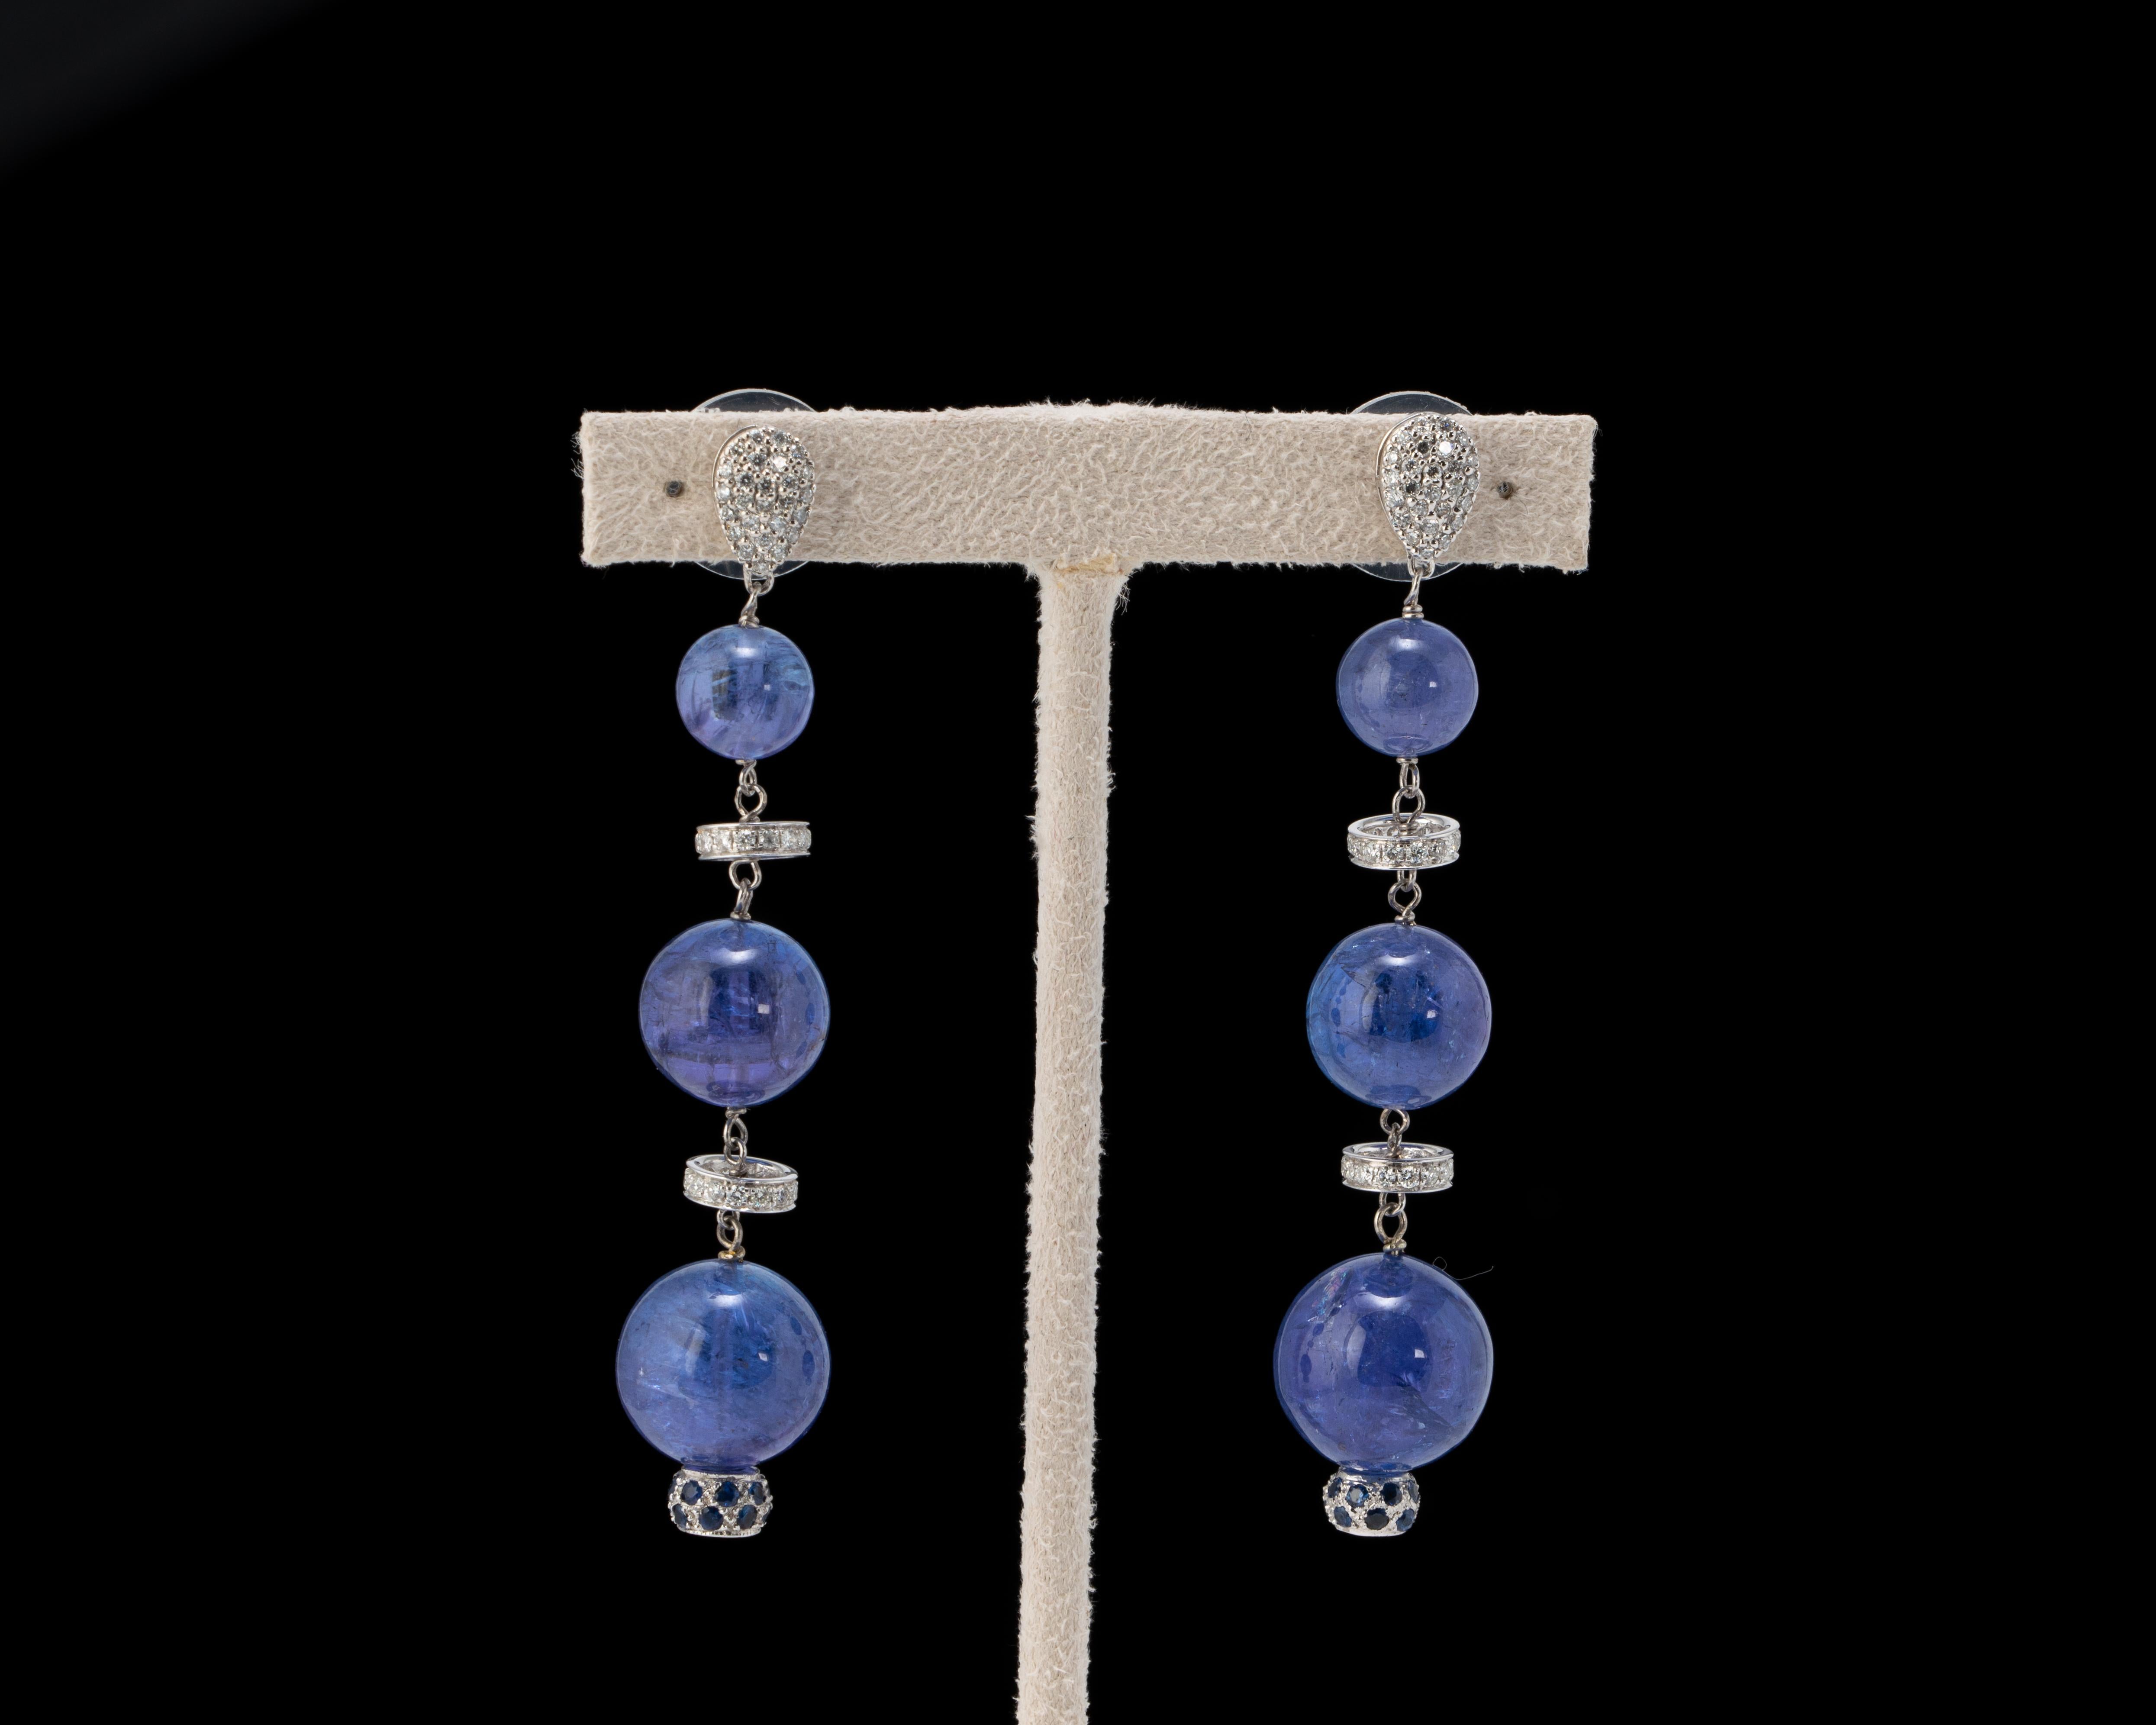 A fabulous pair of 74 carats Tanzanite, Diamond and 18K Gold earrings with great movement and a pop of color. 
Please feel free to message us if you have any queries. 
Free shipping provided. Returns accepted. 